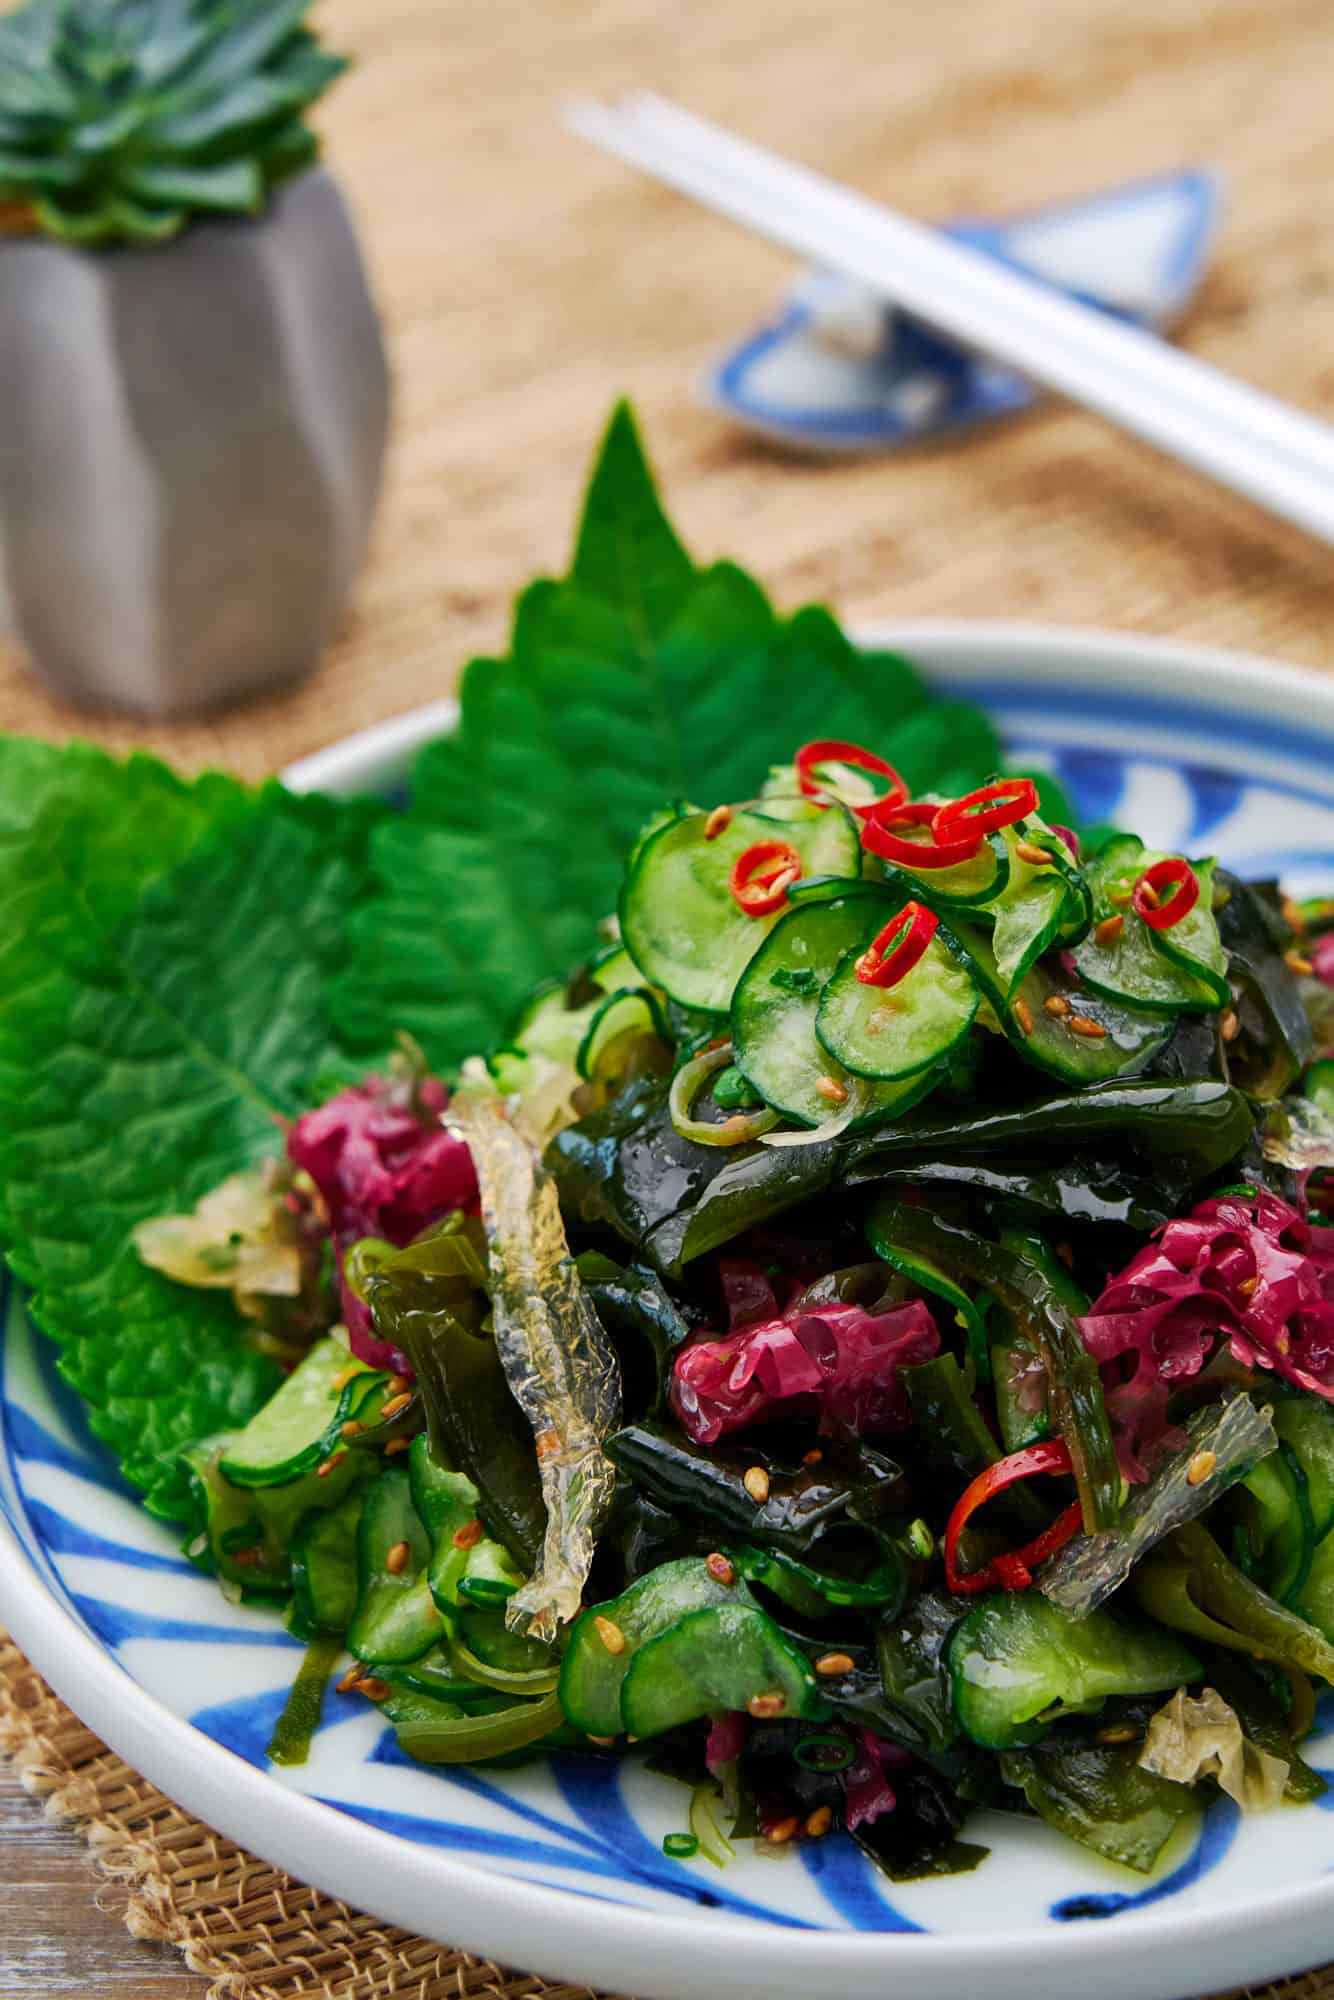 Homemade seaweed salad with a nutritious blend of Japanese seaweed and crunchy cucumbers, just like at sushi restaurants.